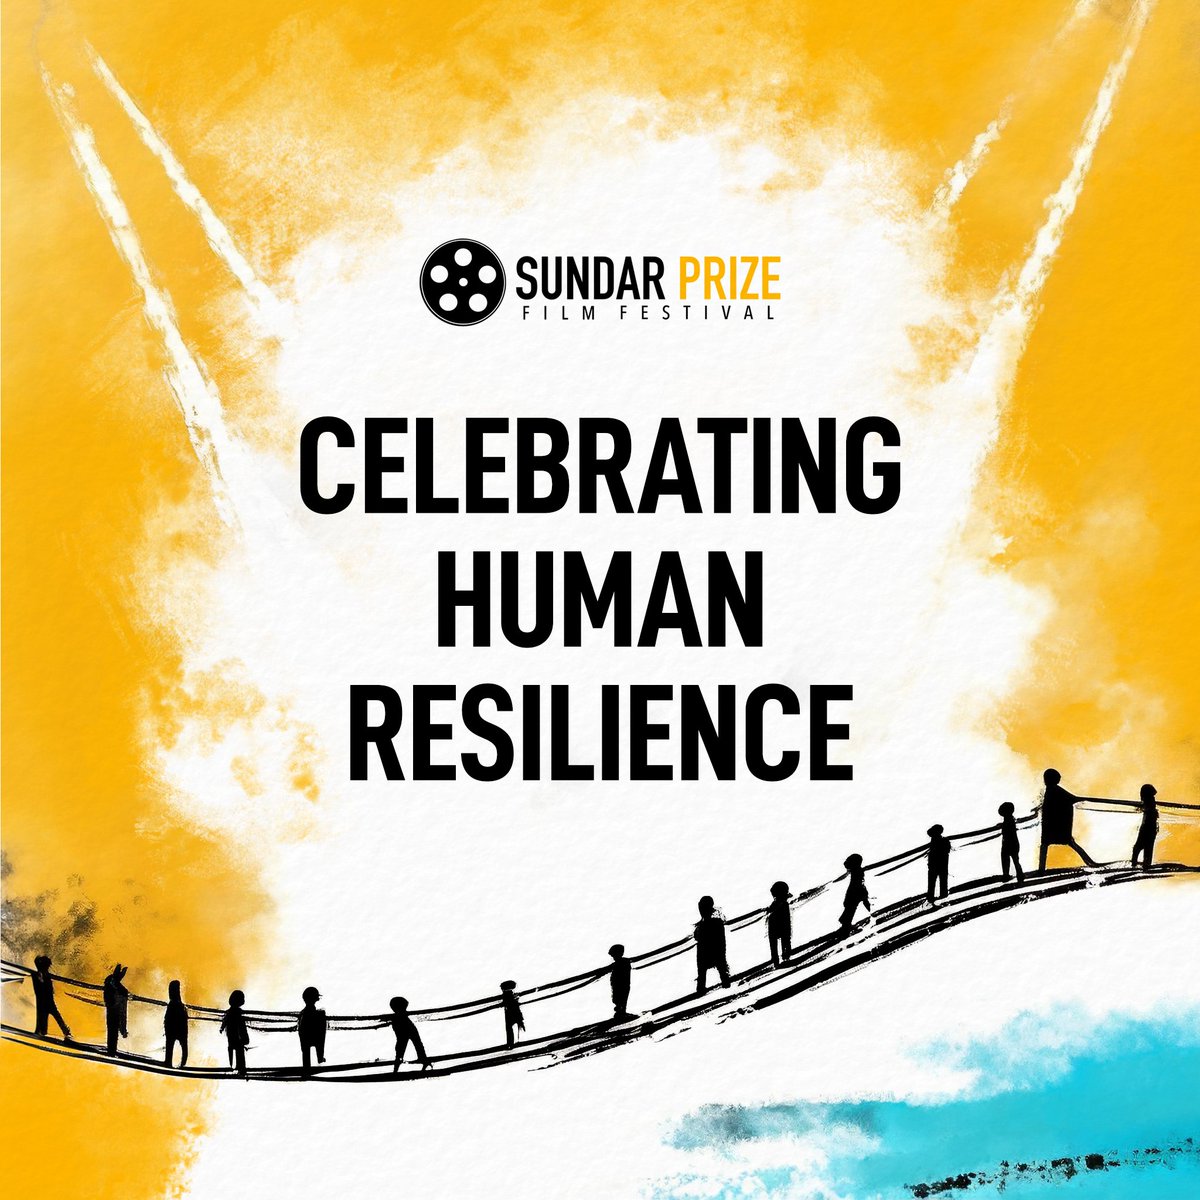 With great pleasure, we would like to announce the theme for the inaugural year of the Sundar Prize Film Festival 2024: 'Celebrating Human Resilience' ✊ #sundarprize #sundarprizefilmfestival #filmfestival #celebratinghumanresilience #resilience #humanity